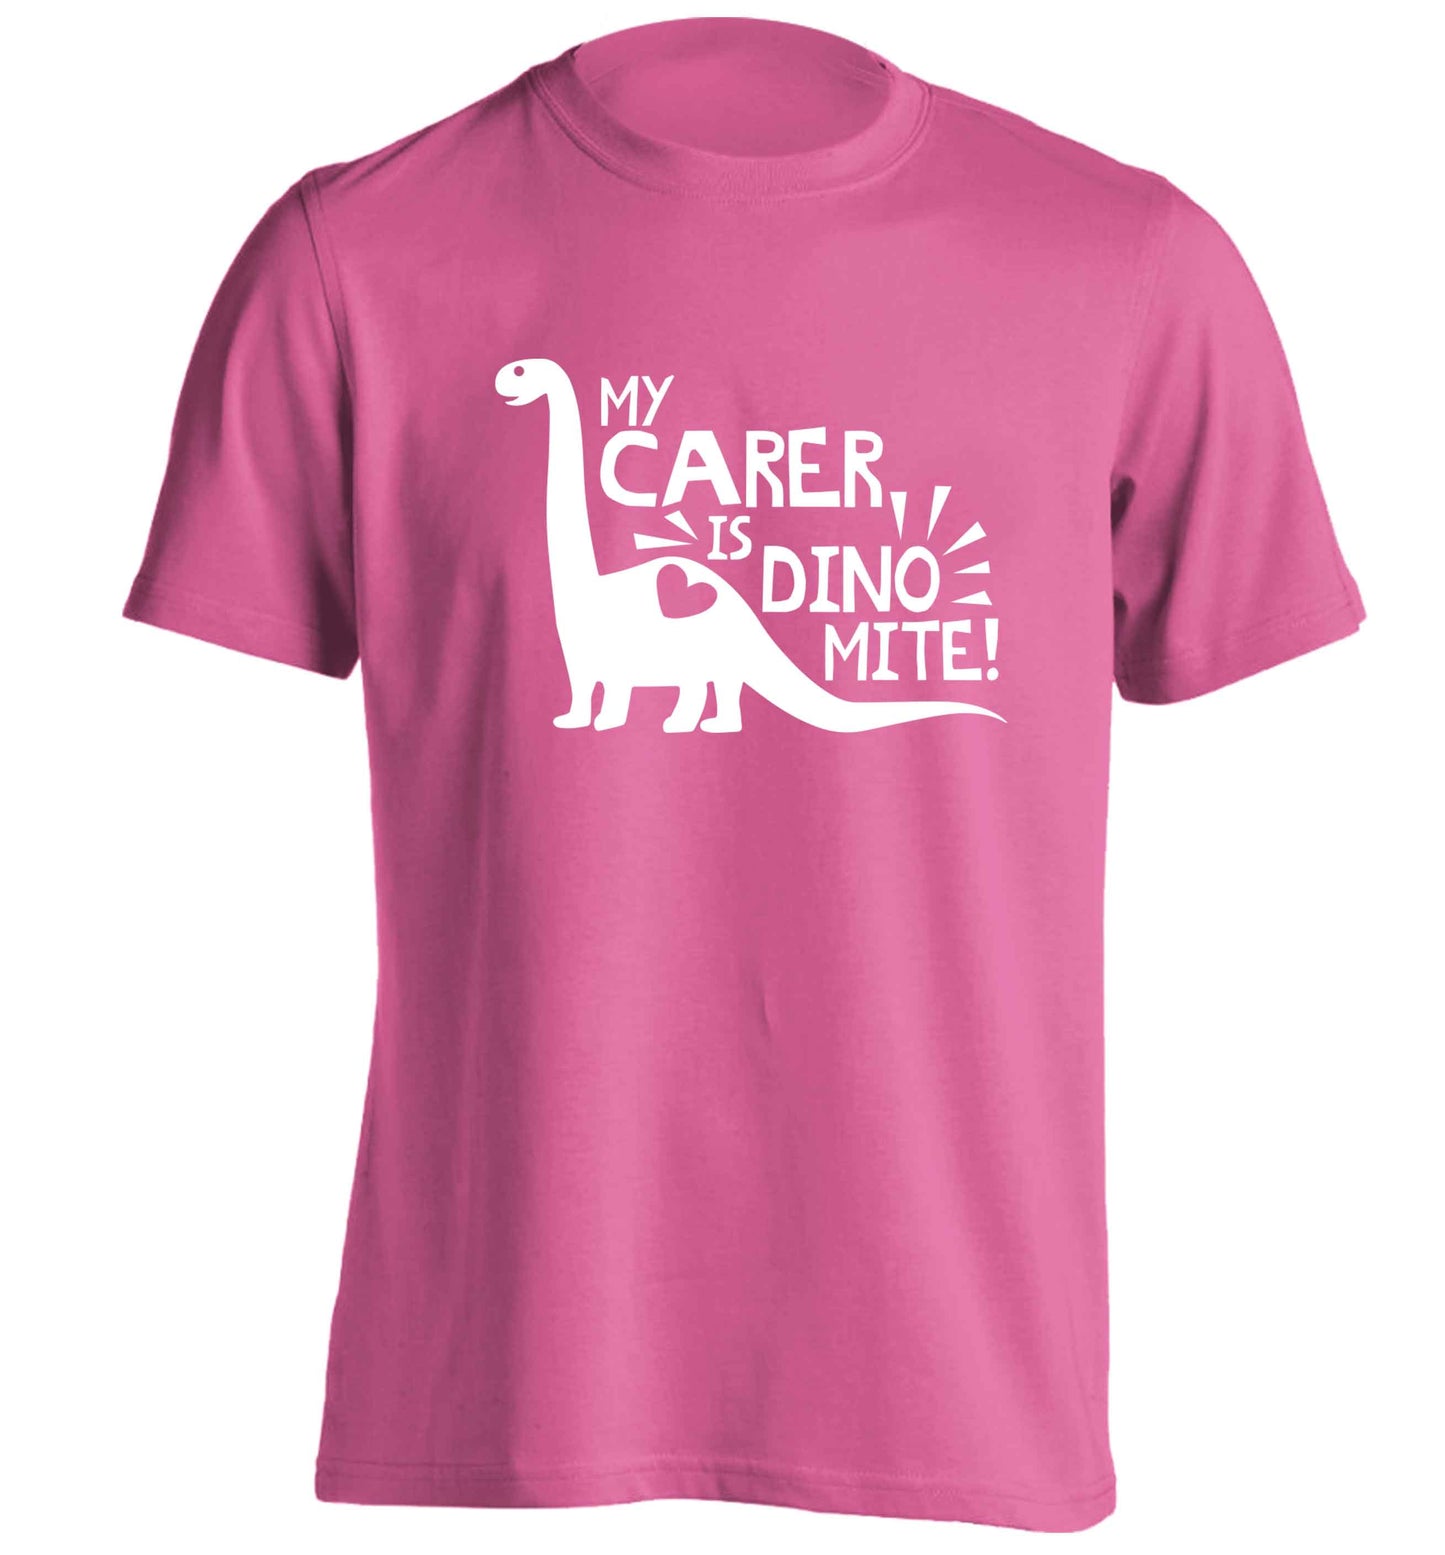 My carer is dinomite! adults unisex pink Tshirt 2XL